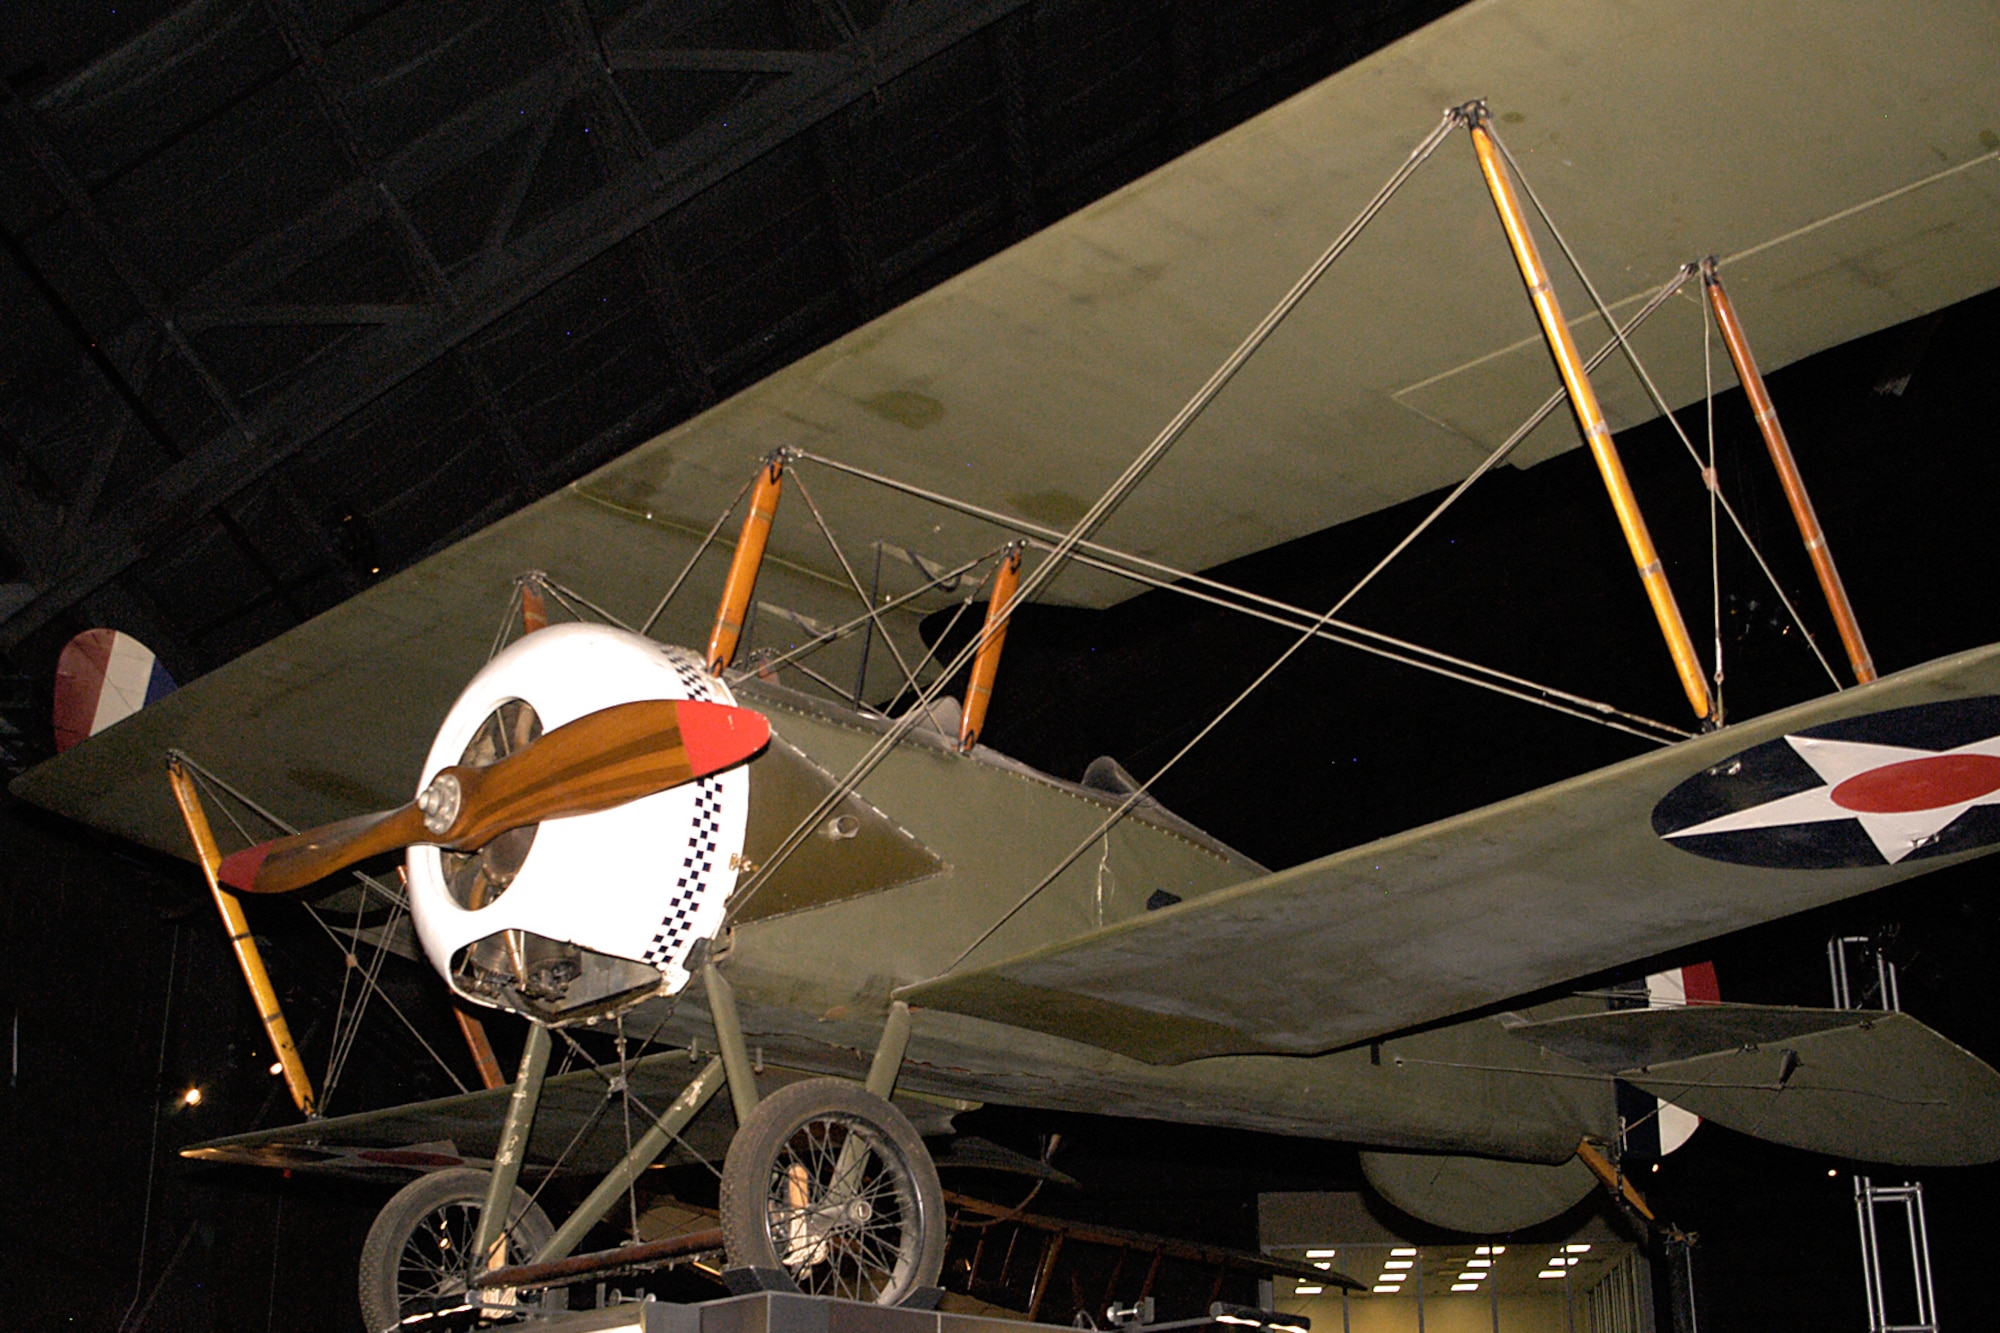 Thomas Morse S4C Scout in the Early Years Gallery at the National Museum of the United States Air Force. (U.S. Air Force photo)
